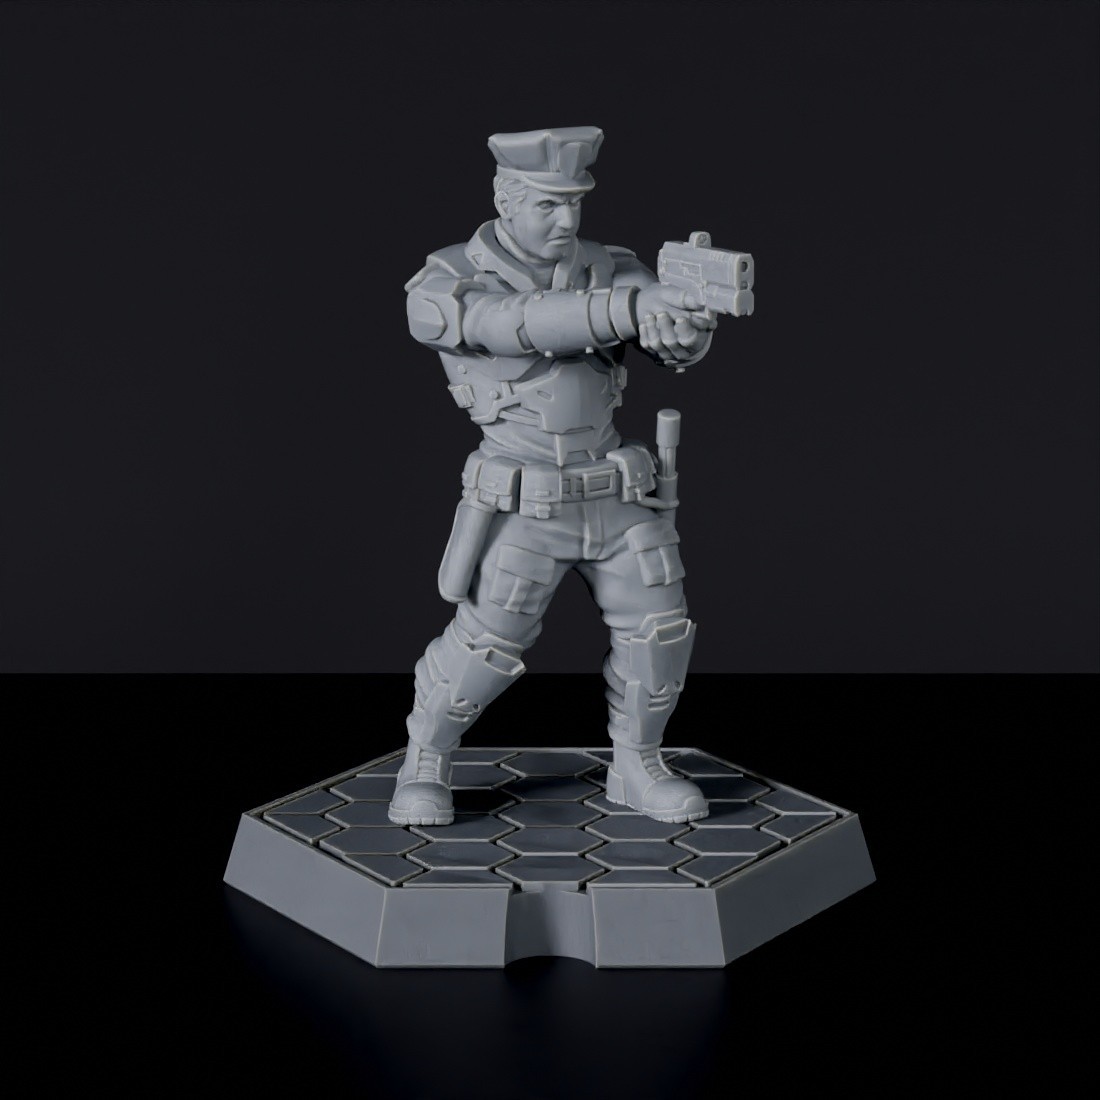 Futuristic miniature of sci fi policeman with hat, bat and futuristic gun - Police Officer ver. 1 for Gridwars TCPD army